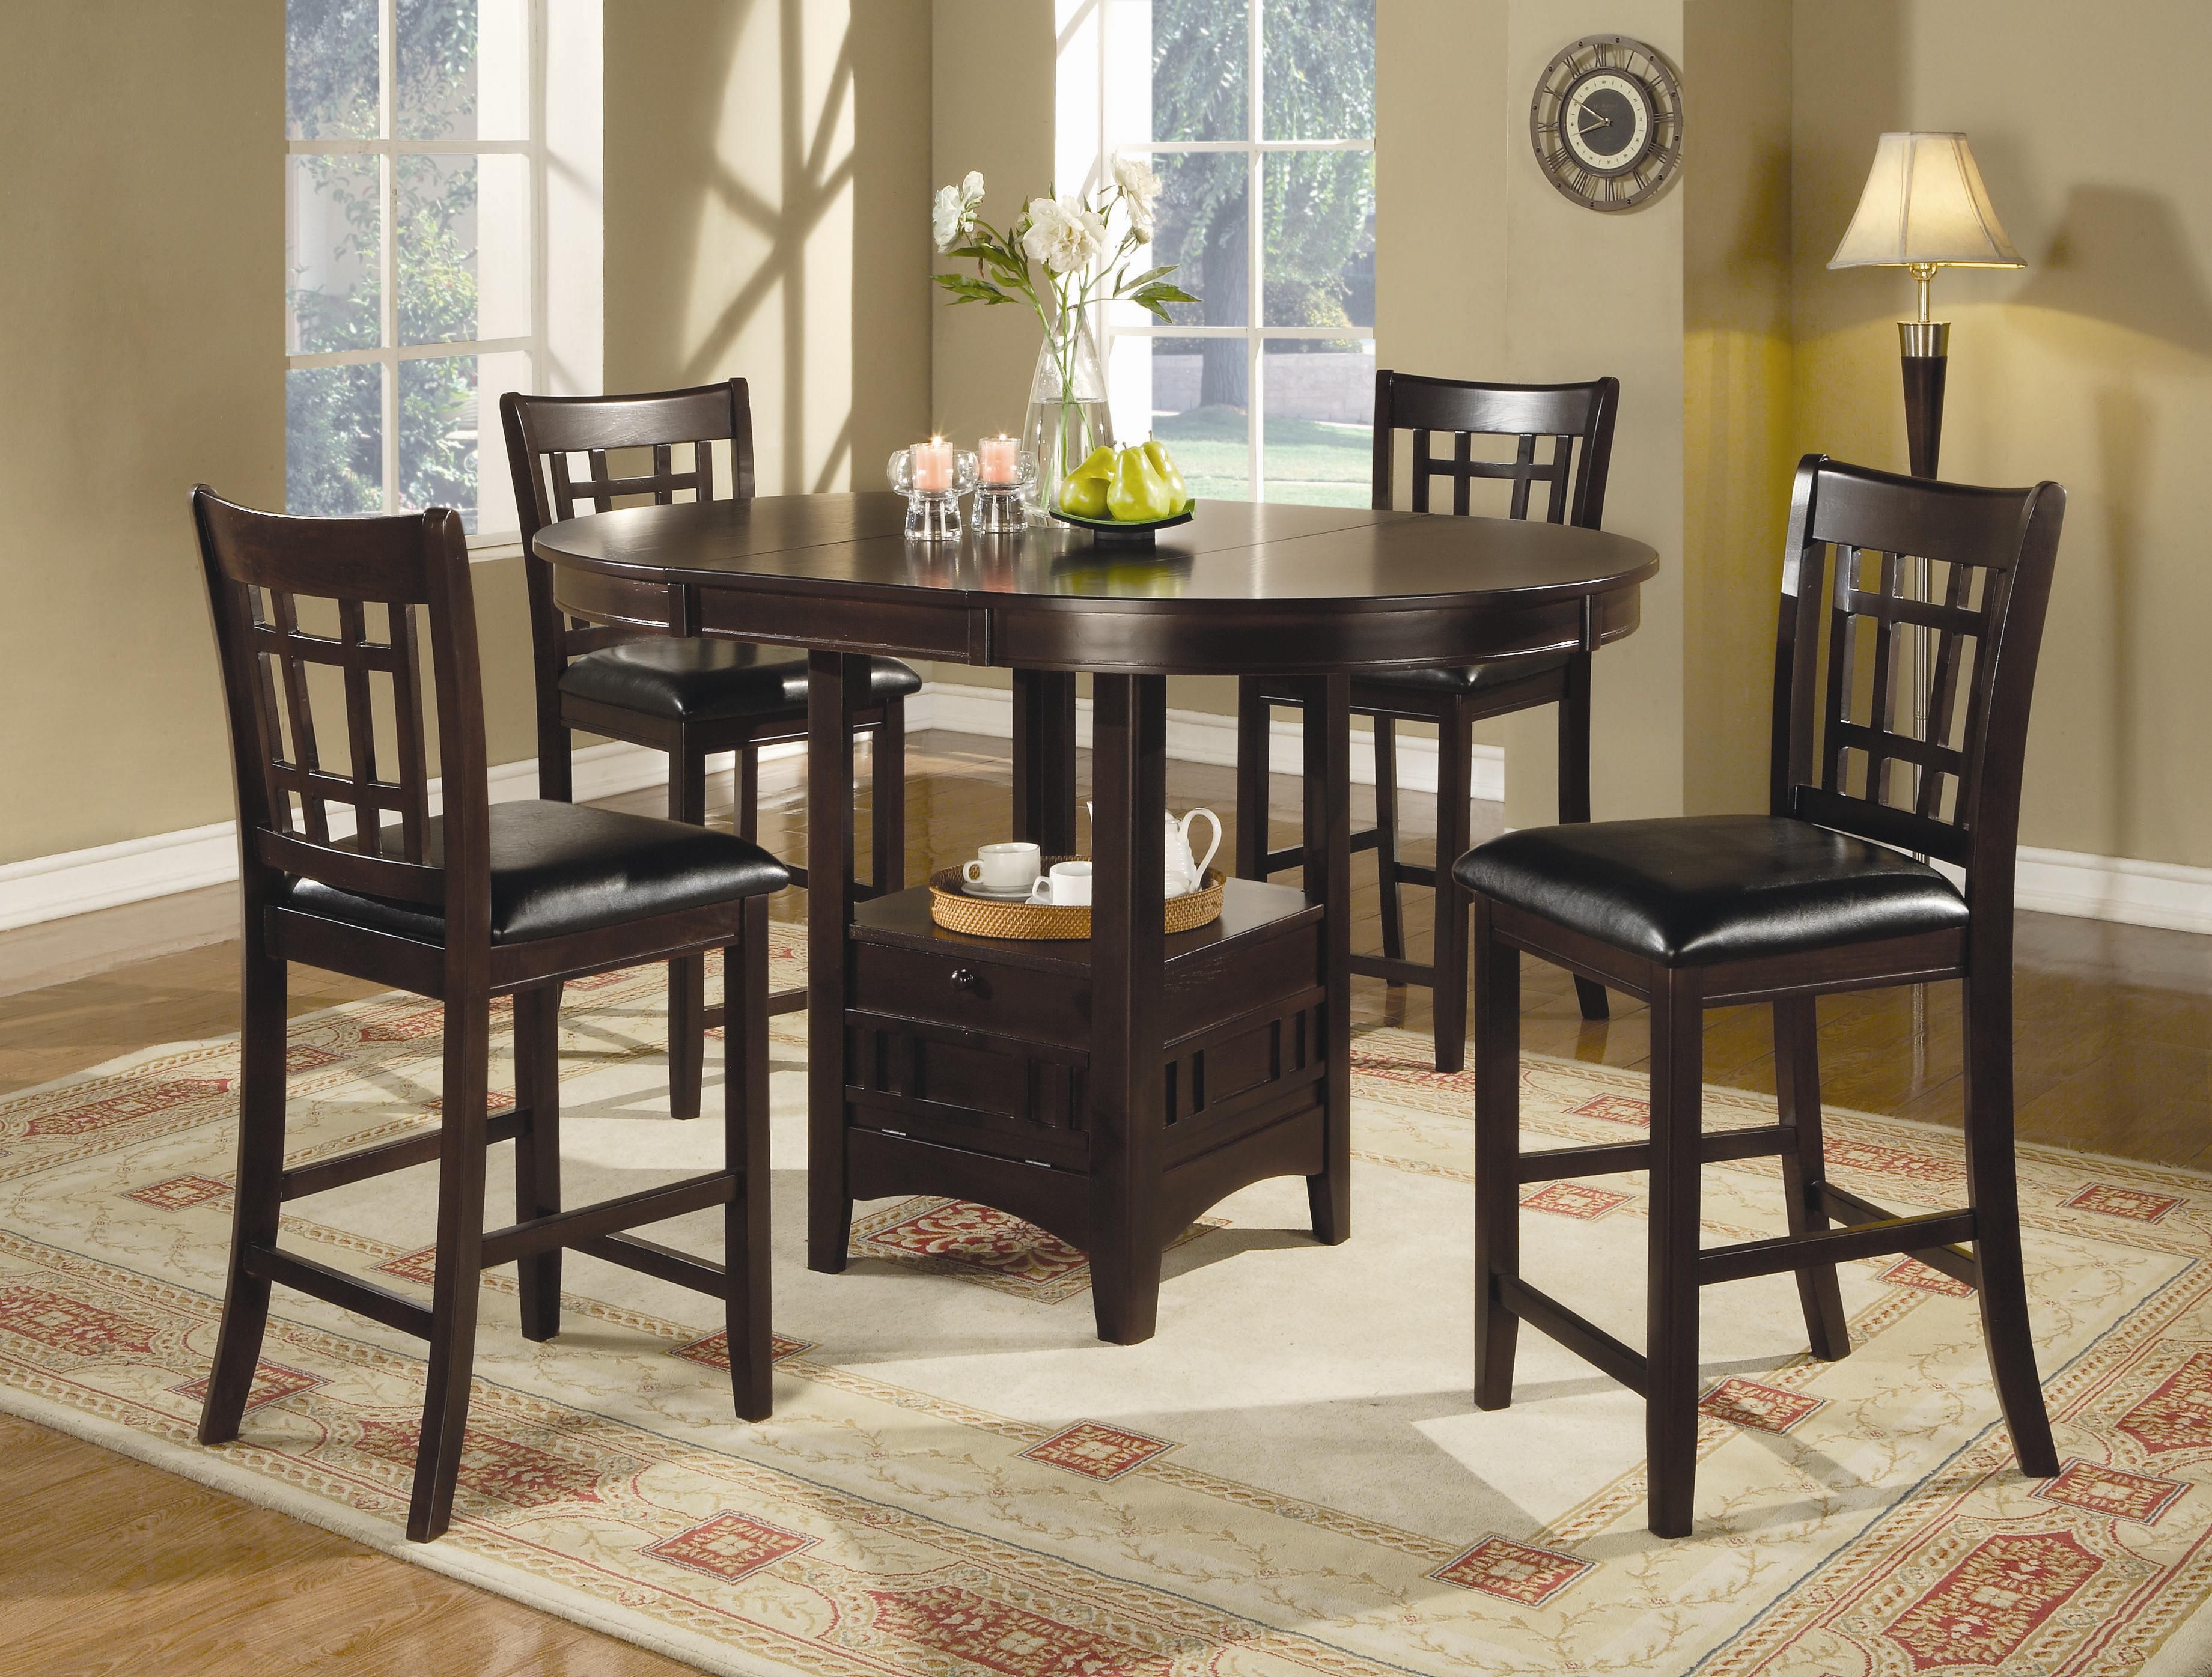 Kitchen Table Set Bar Height – Home Decor Photos Gallery With Regard To 2018 Winsted 4 Piece Counter Height Dining Sets (View 8 of 20)